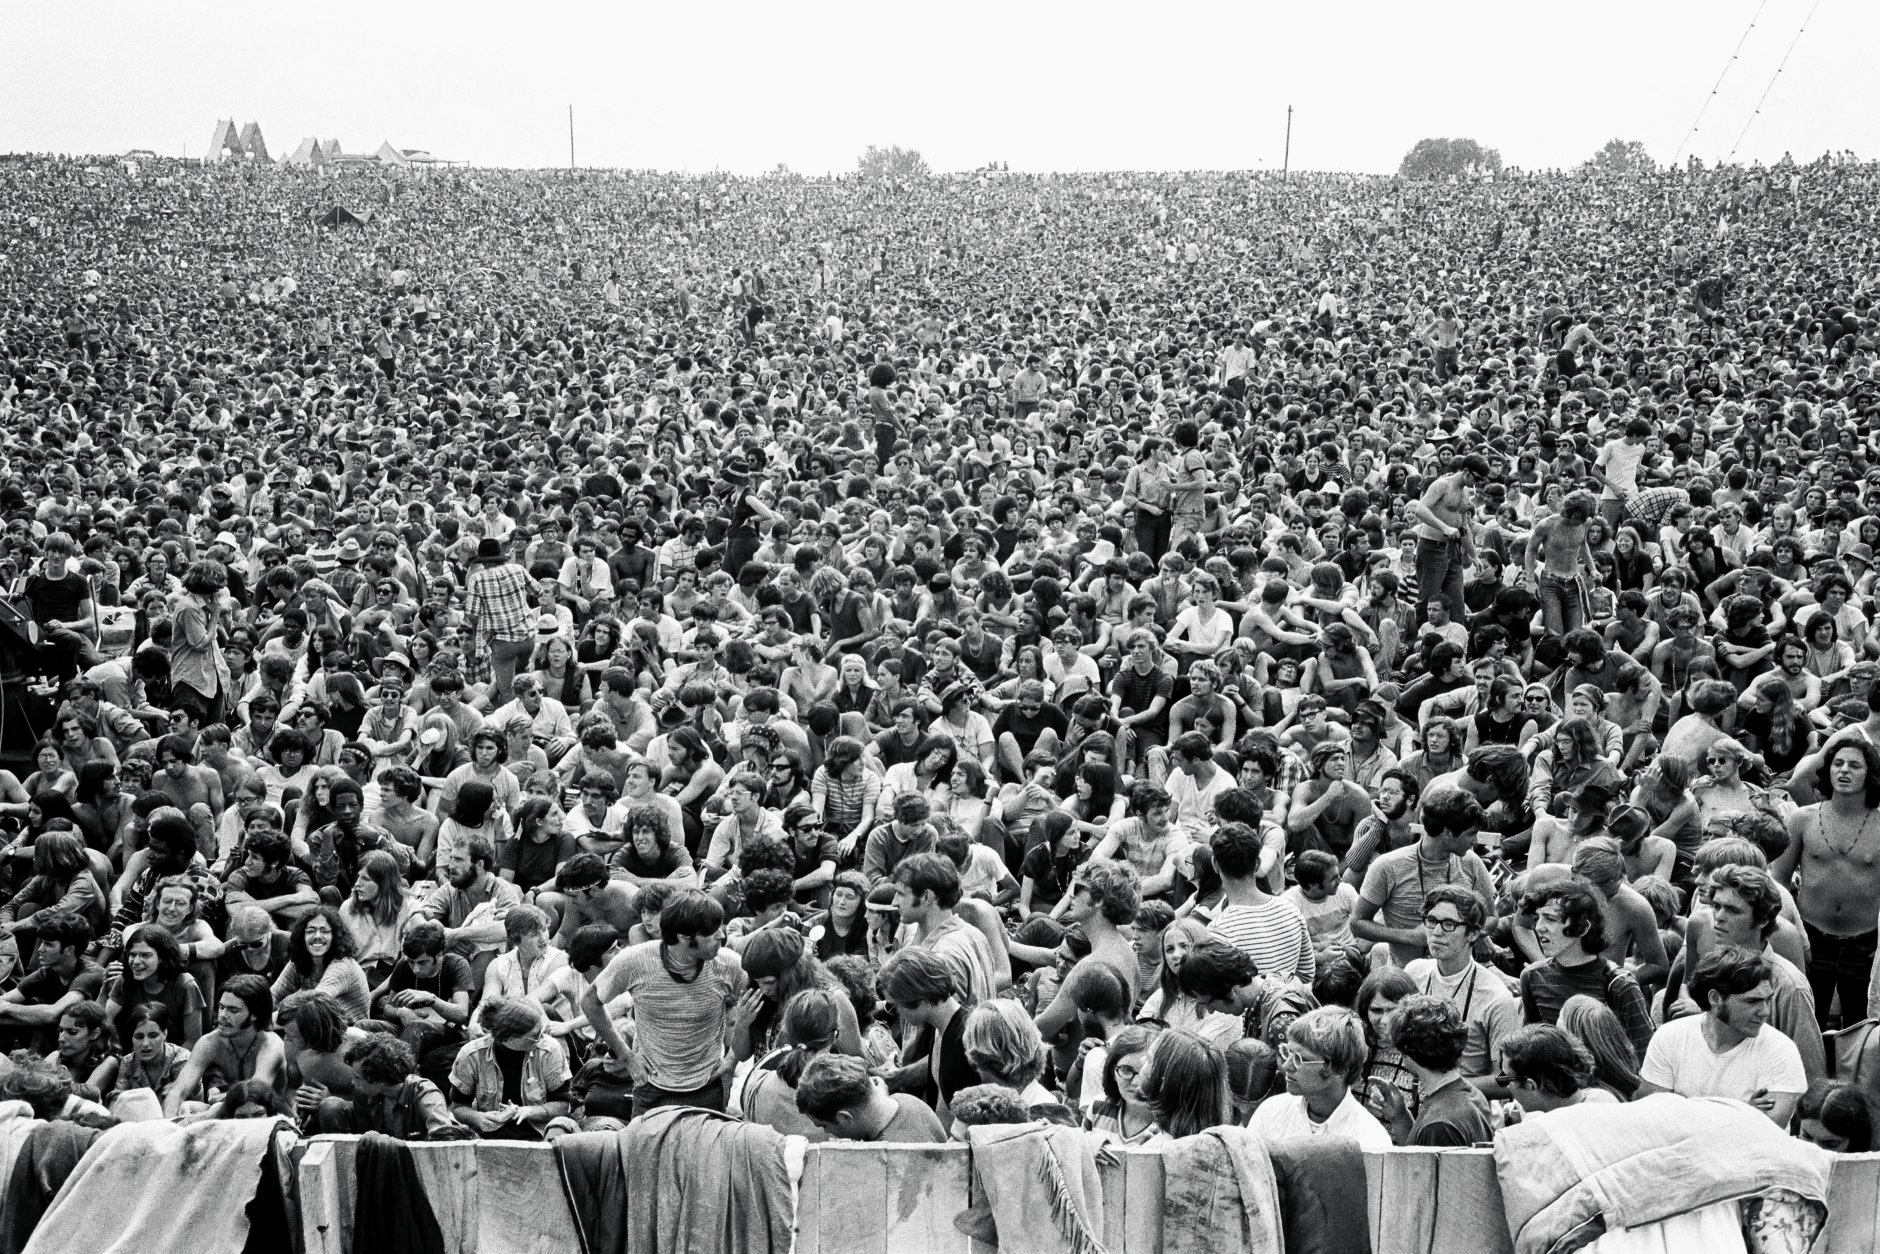 Crowd at Woodstock Festival